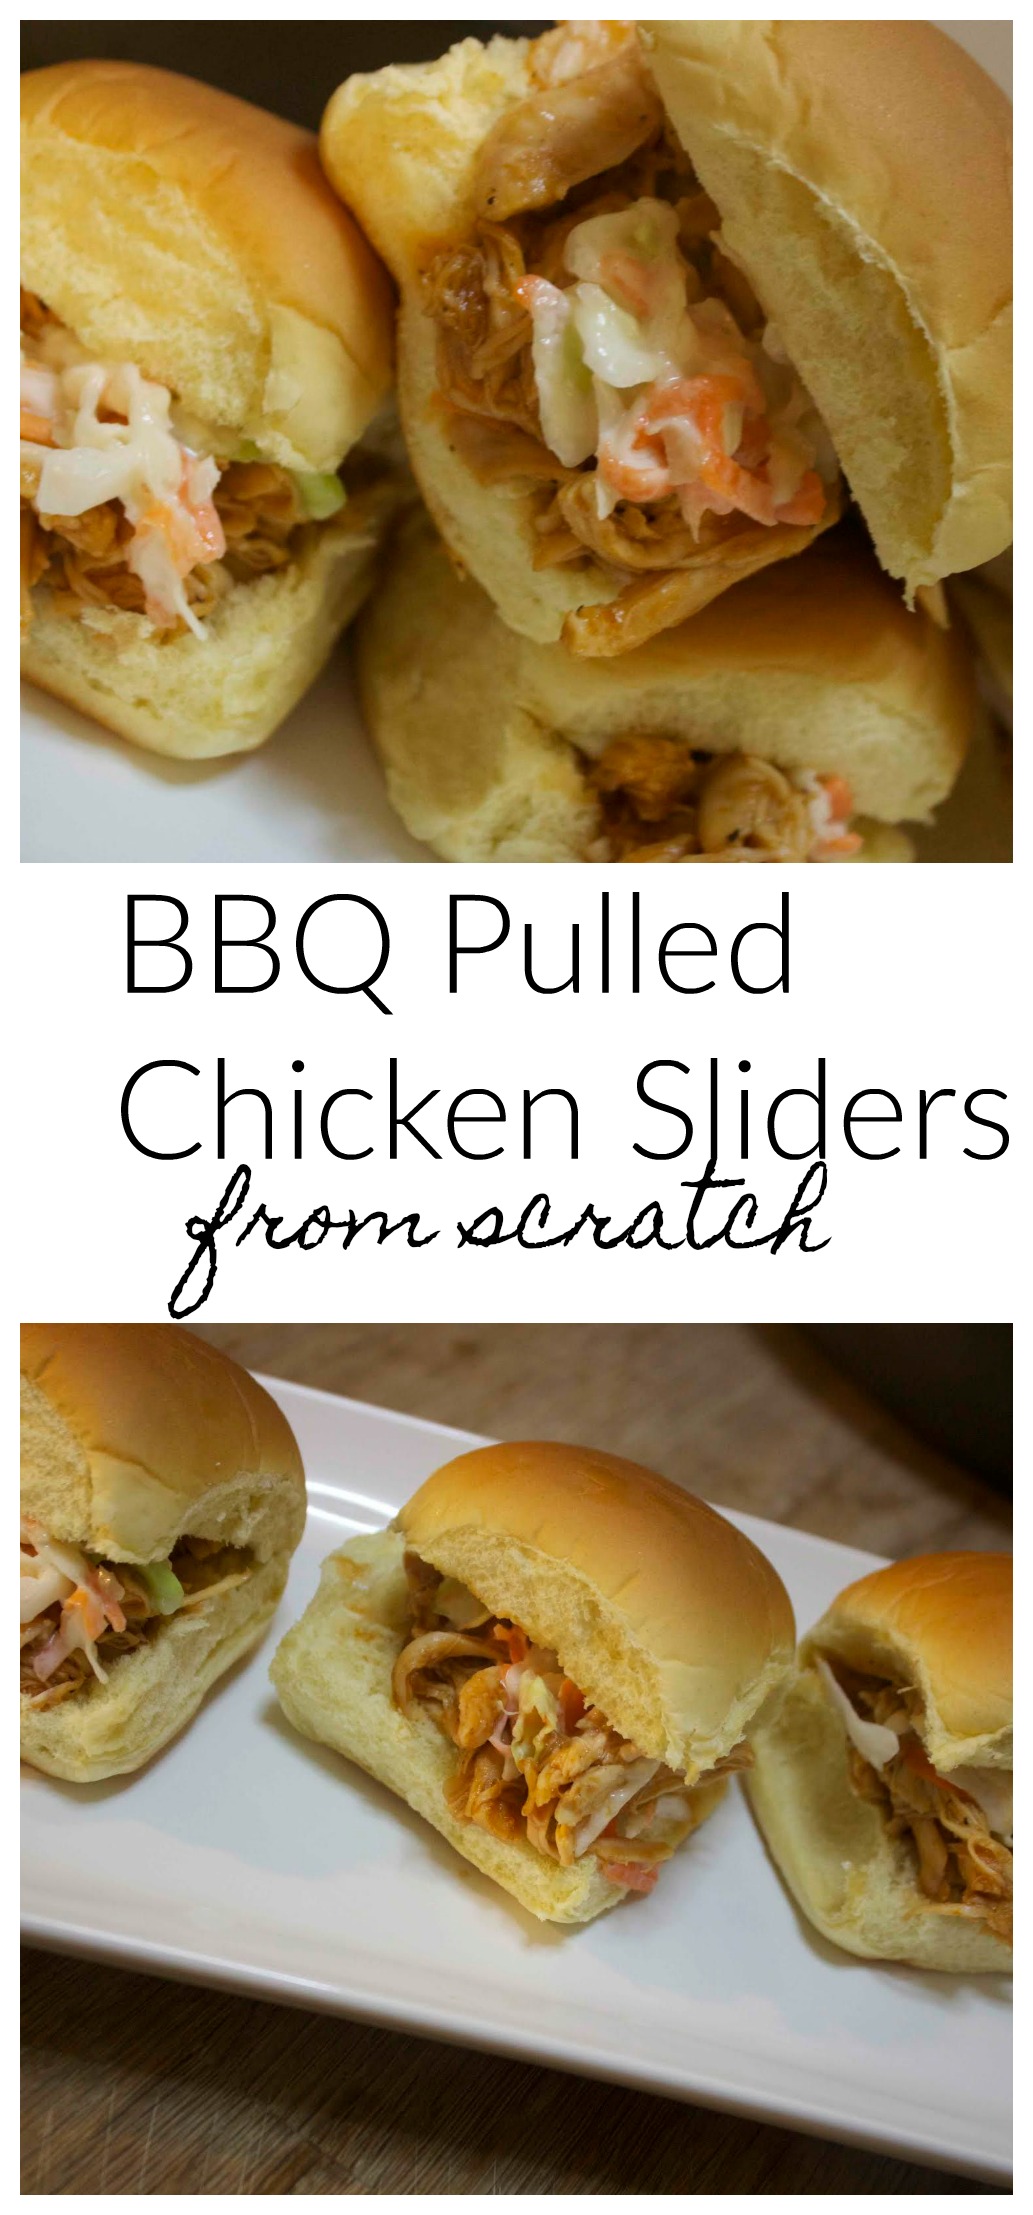 Homemade BBQ Pulled Chicken Sliders | Video & Recipe from Cooked By Julie